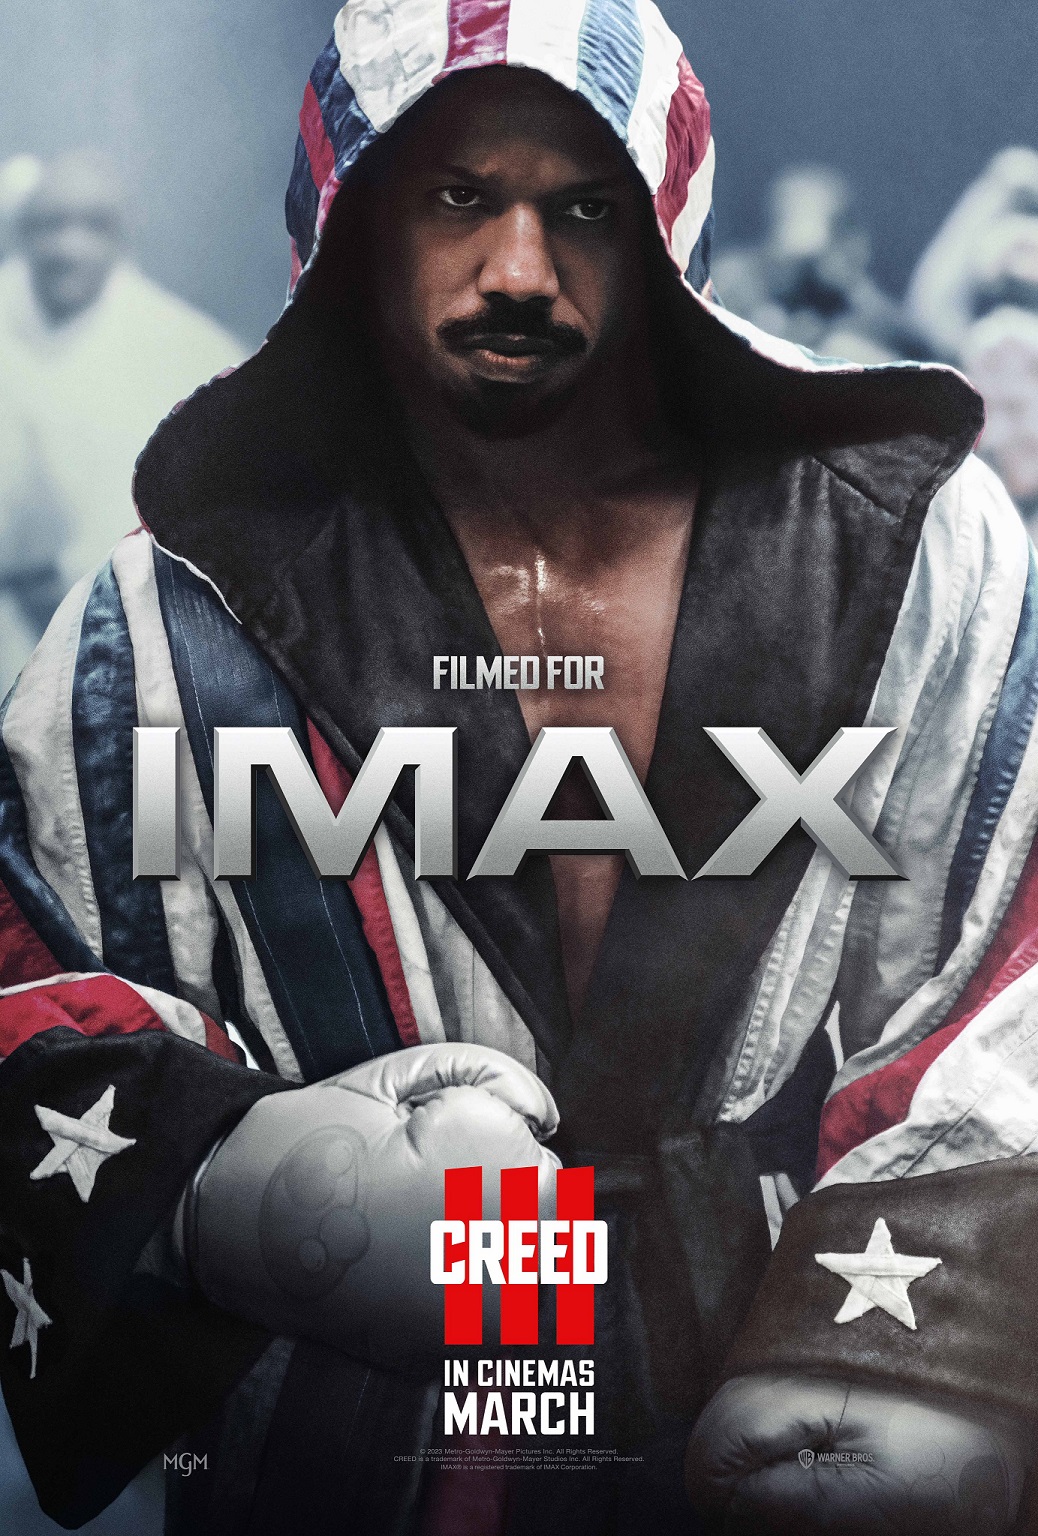 "Creed III" is the First Sports Movie Shot on IMAX Cameras